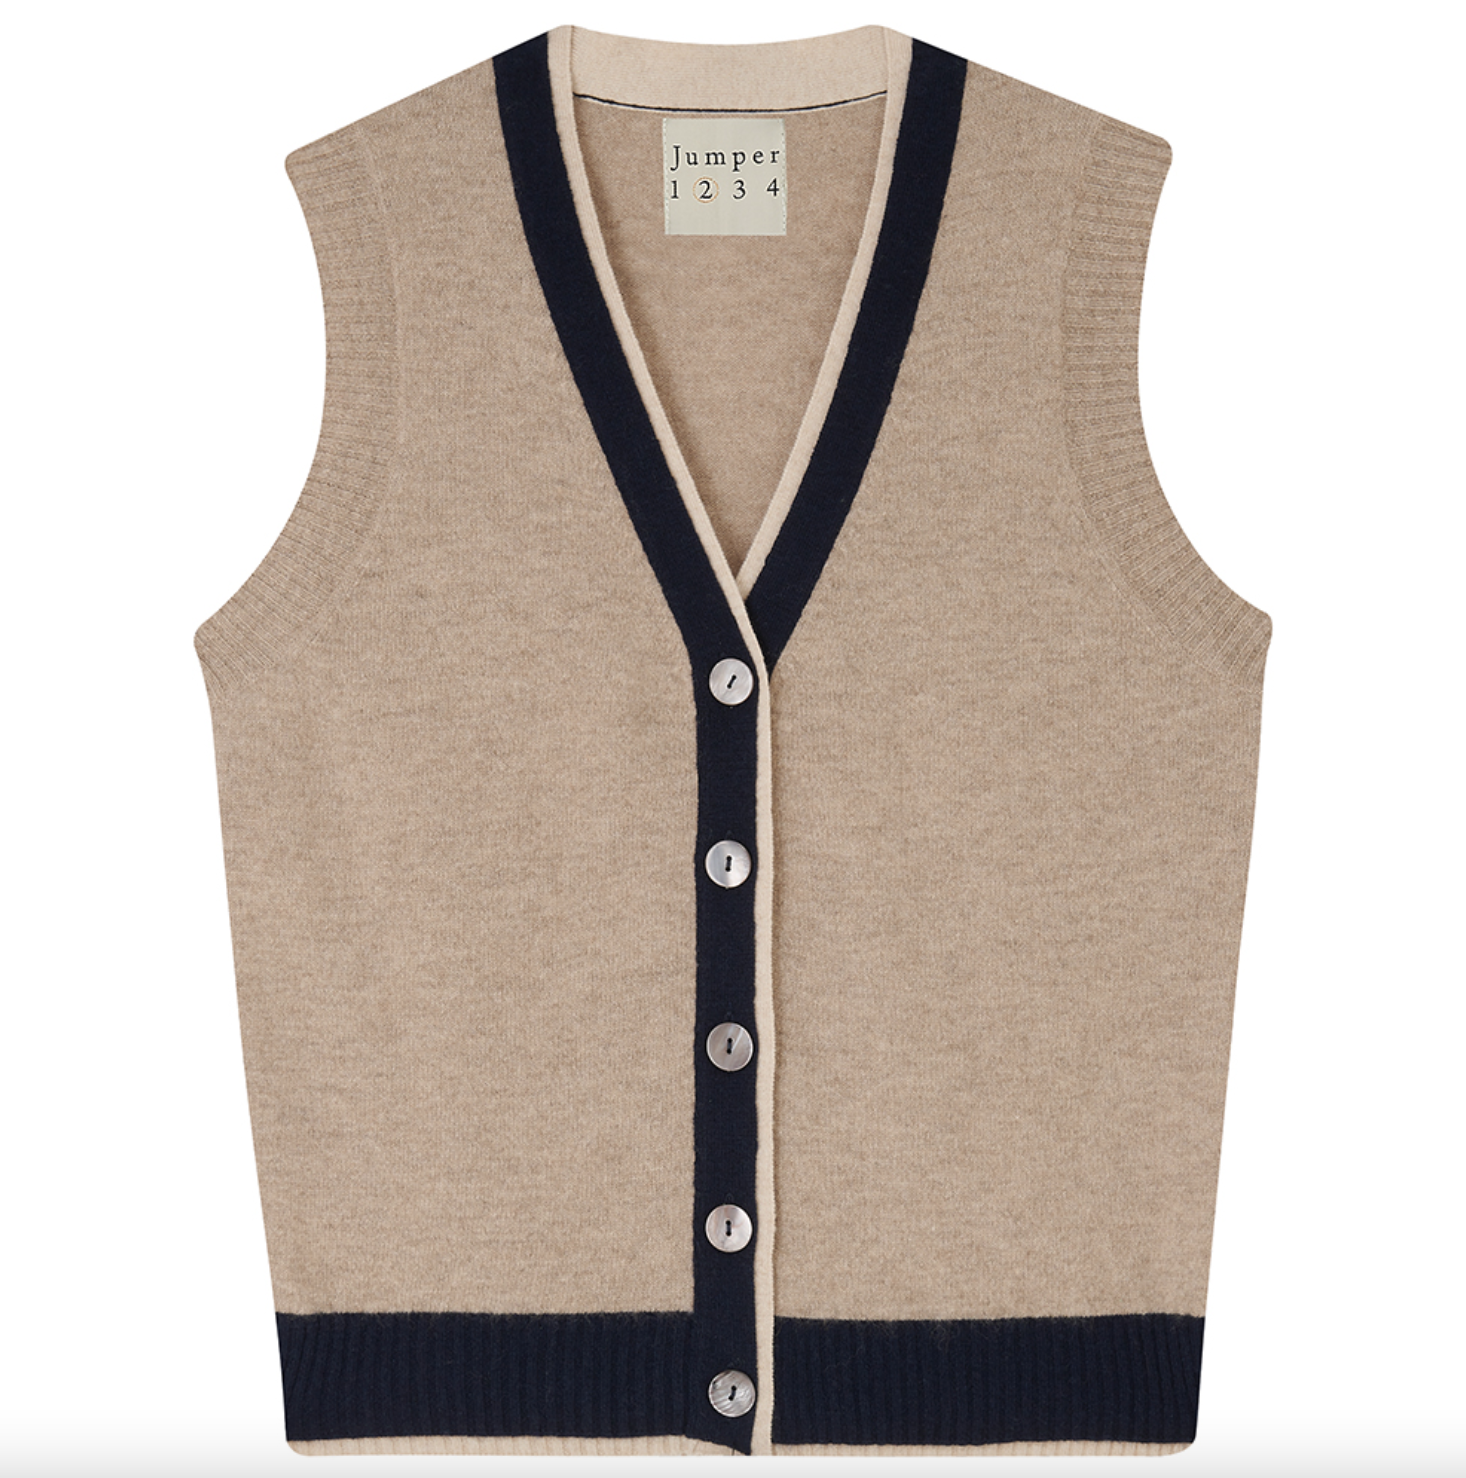 A beige sleeveless DOUBLE RIB SLEEVELESS CARDIGAN with dark blue trim and buttons, featuring a V-neckline and a visible interior label marked "Jumper 1 2 3 4," exuding Arizona style.